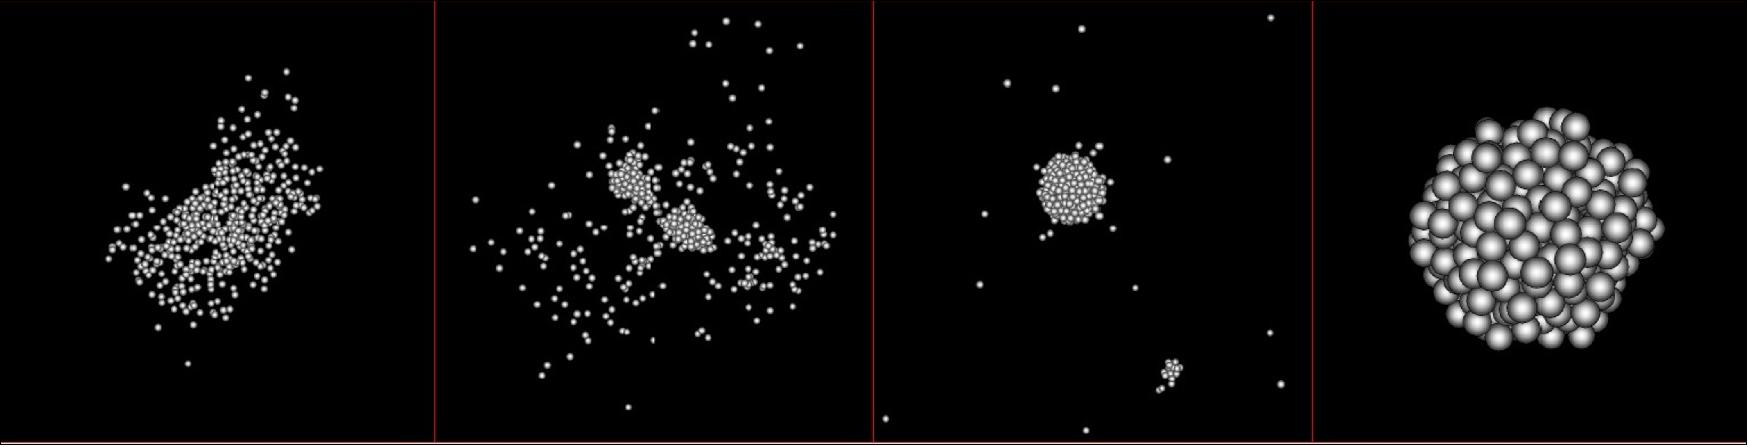 Figure 25: Asteroid fragments re-accumulating. Simulation snapshots of fragments at time steps 1 minute, 0.75 hours, 2 hours, and 5 hours after the asteroid collision. The first panel shows the immediate distribution of the particles that accrete to form the final spinning top aggregate demonstrated in the last panel (image credit: Brian May and Claudia Manzoni)